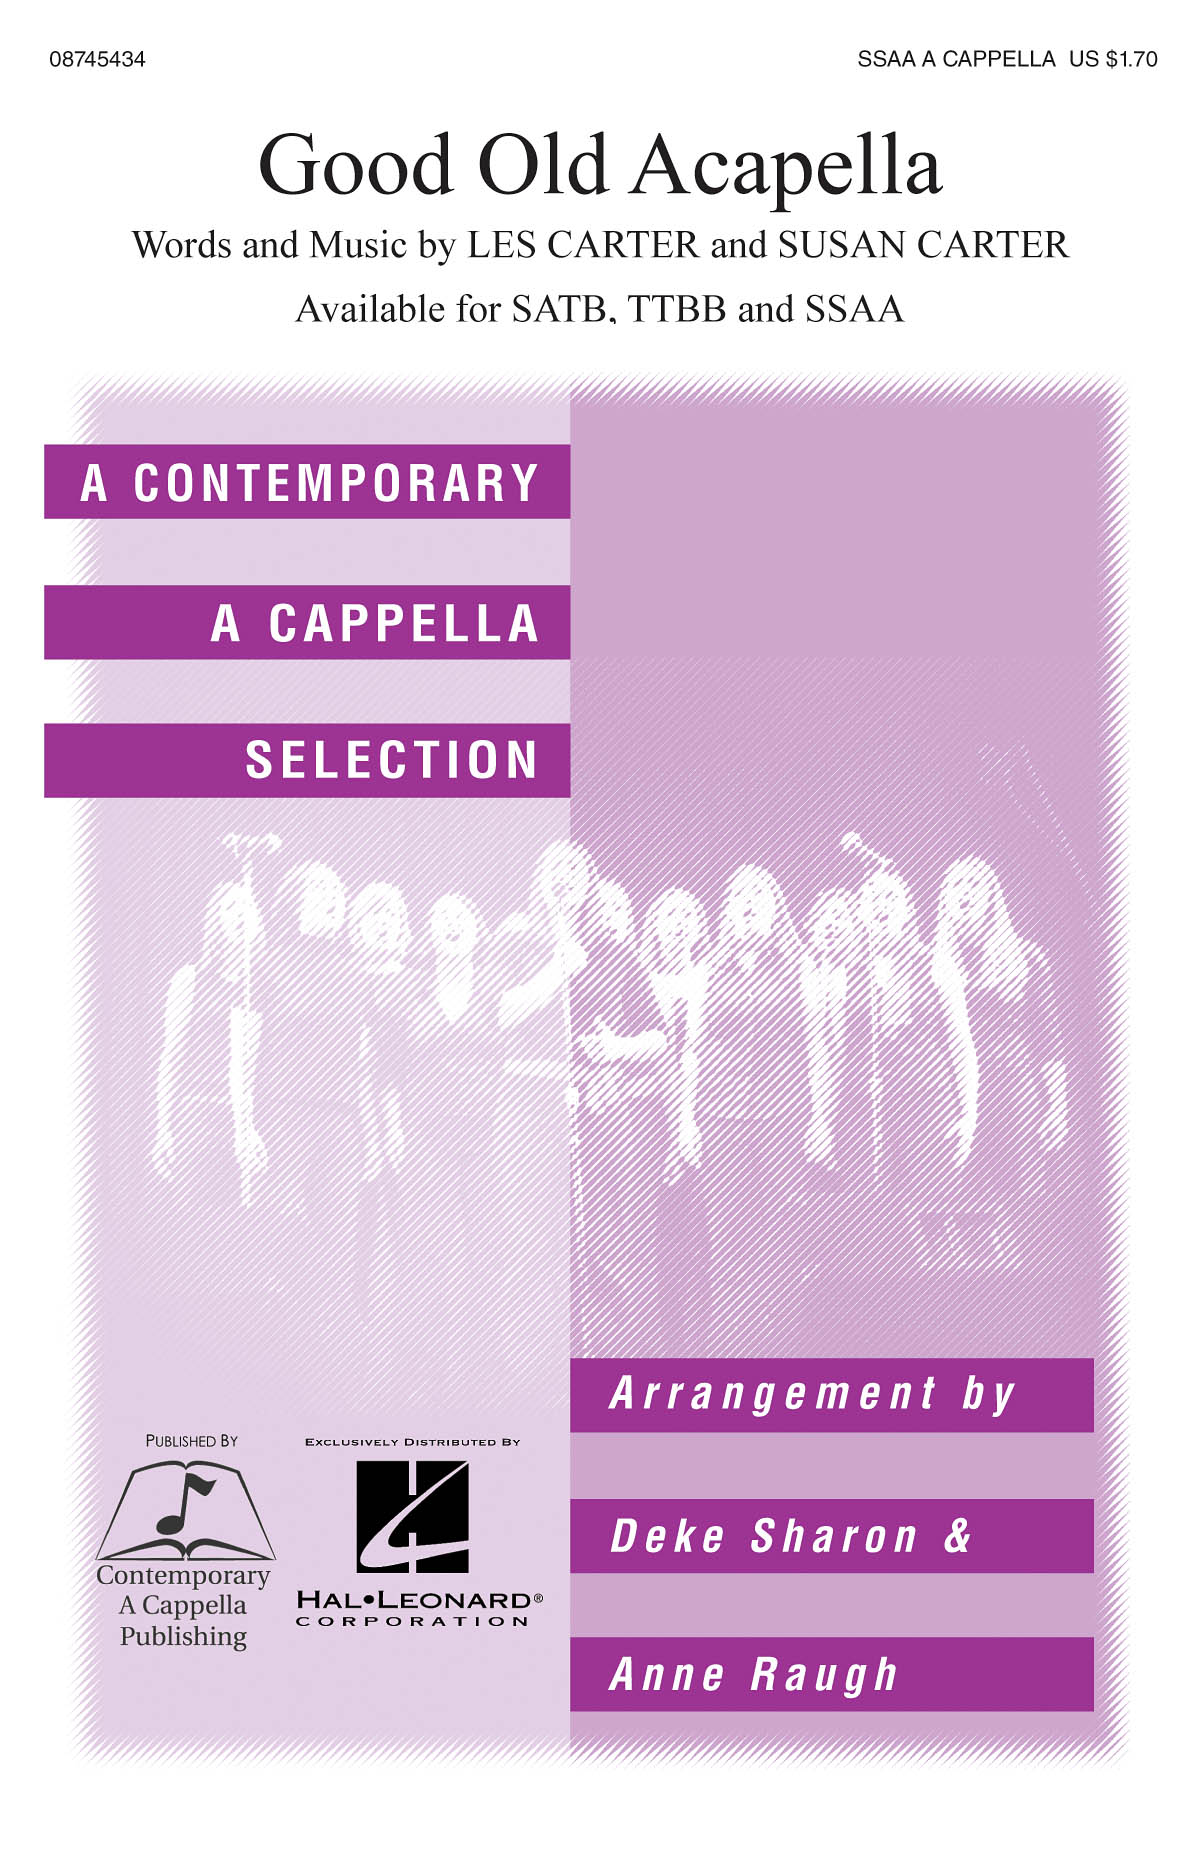 Good Old A Cappella (SSAA)